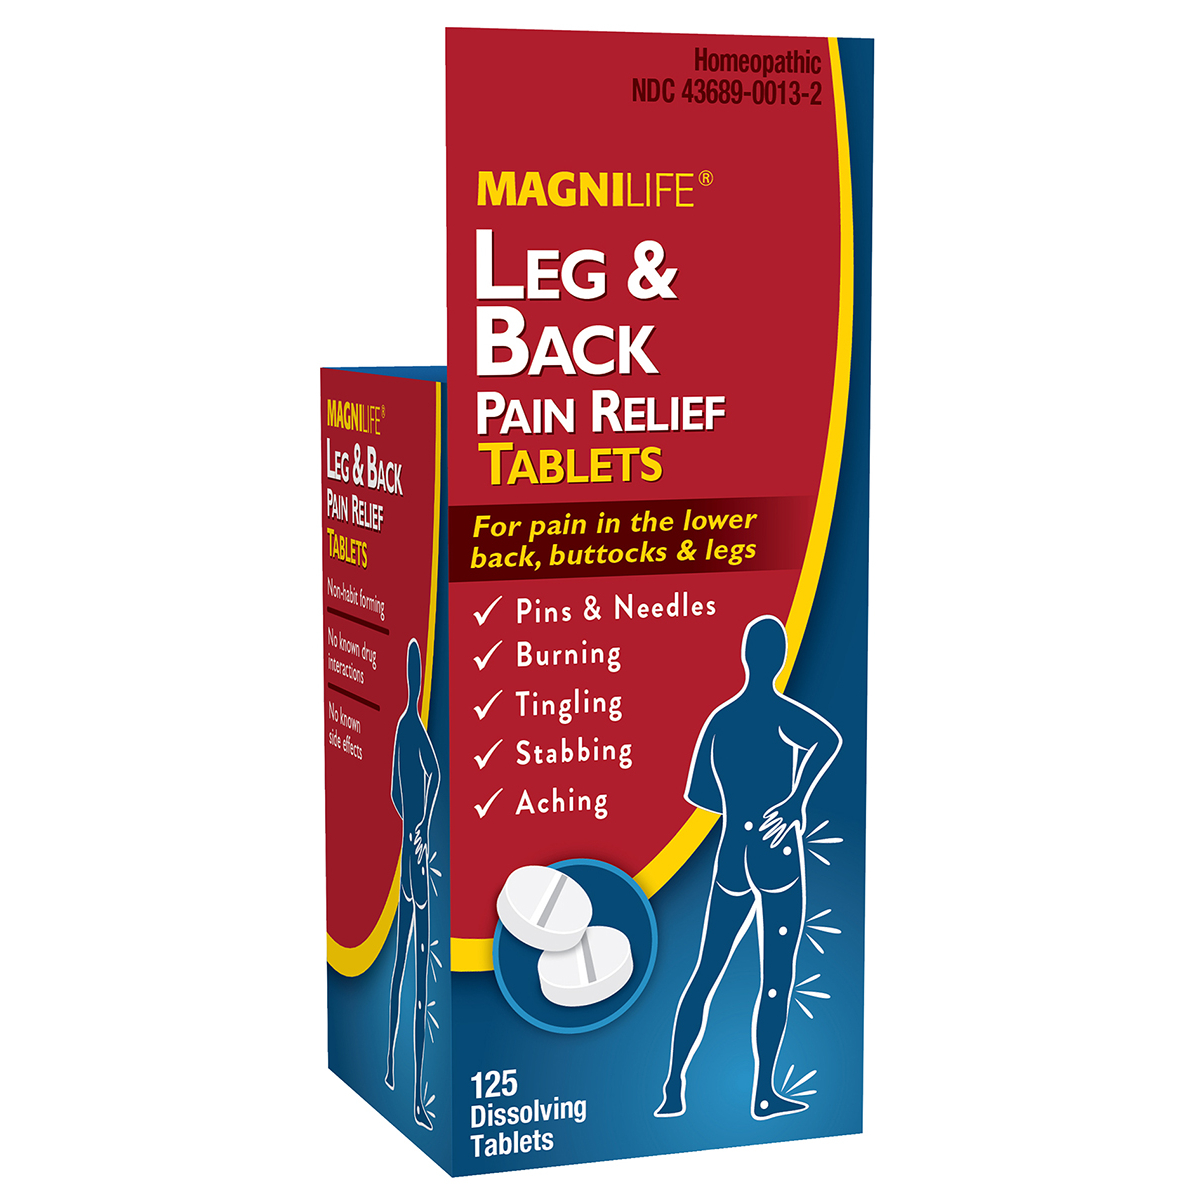 Award Winning Back Pain Relief Products